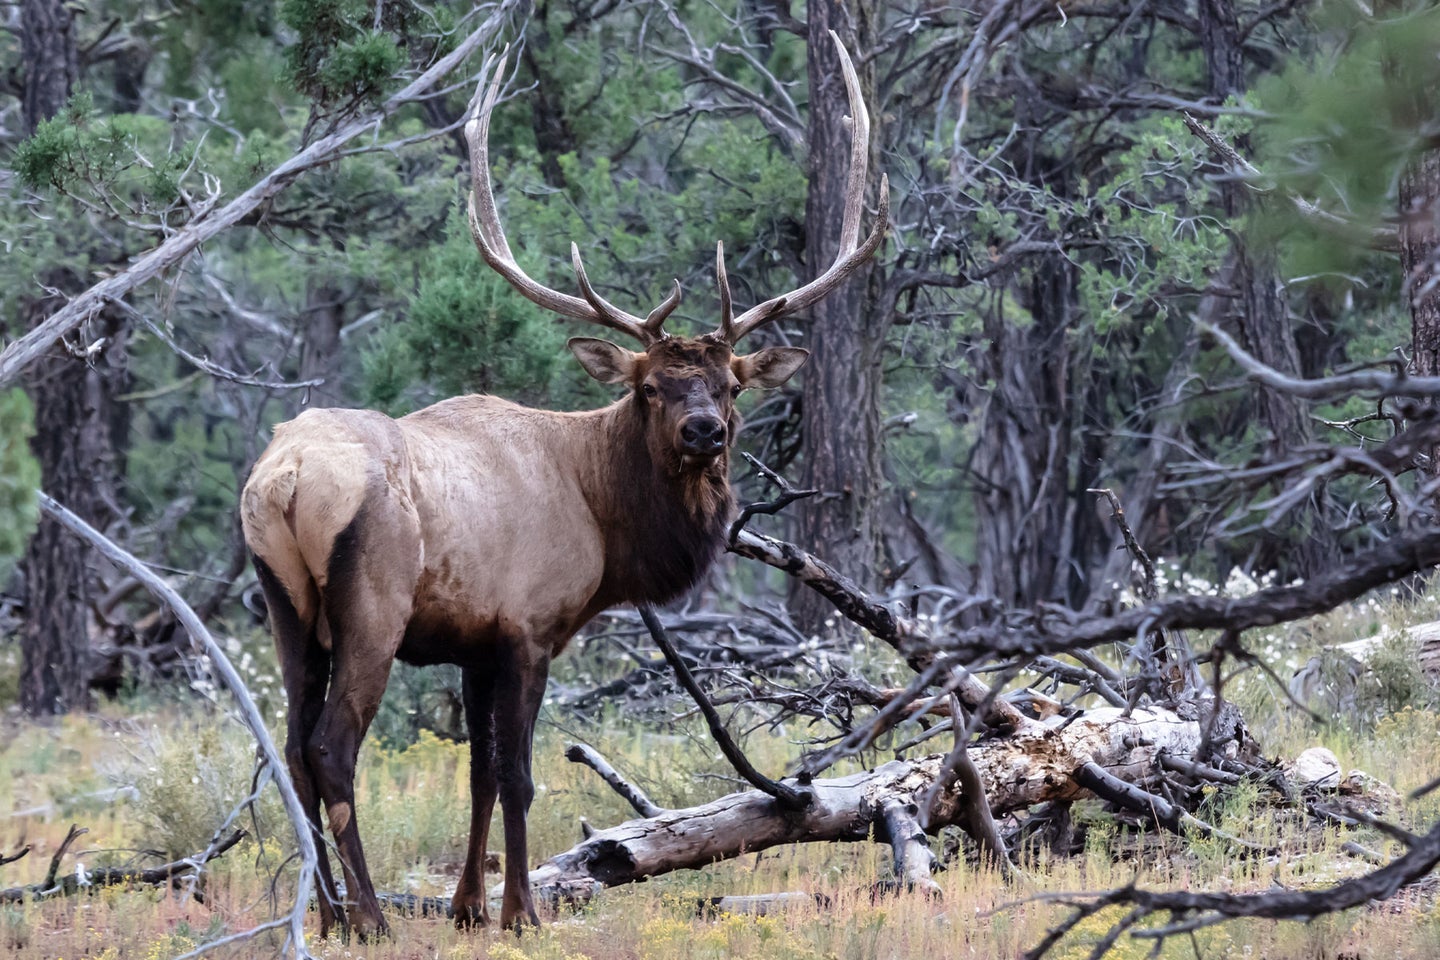 A bull elk stands in a forest.